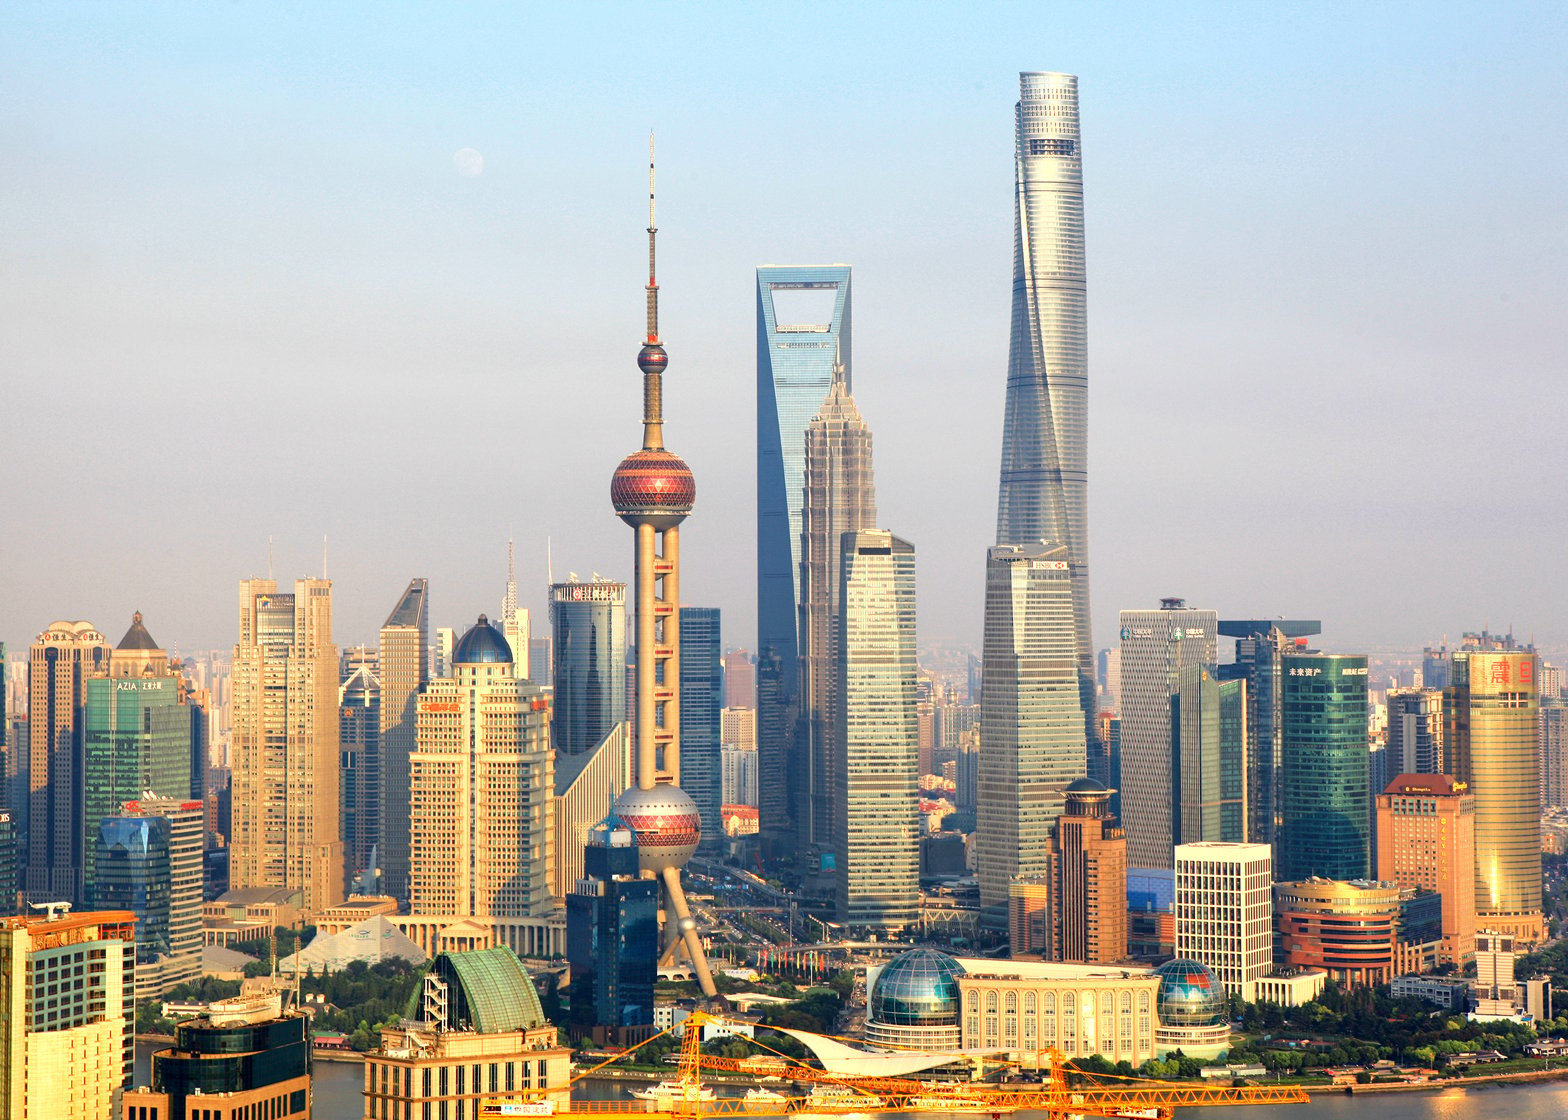 Shanghai Tower tallest buildings in the world